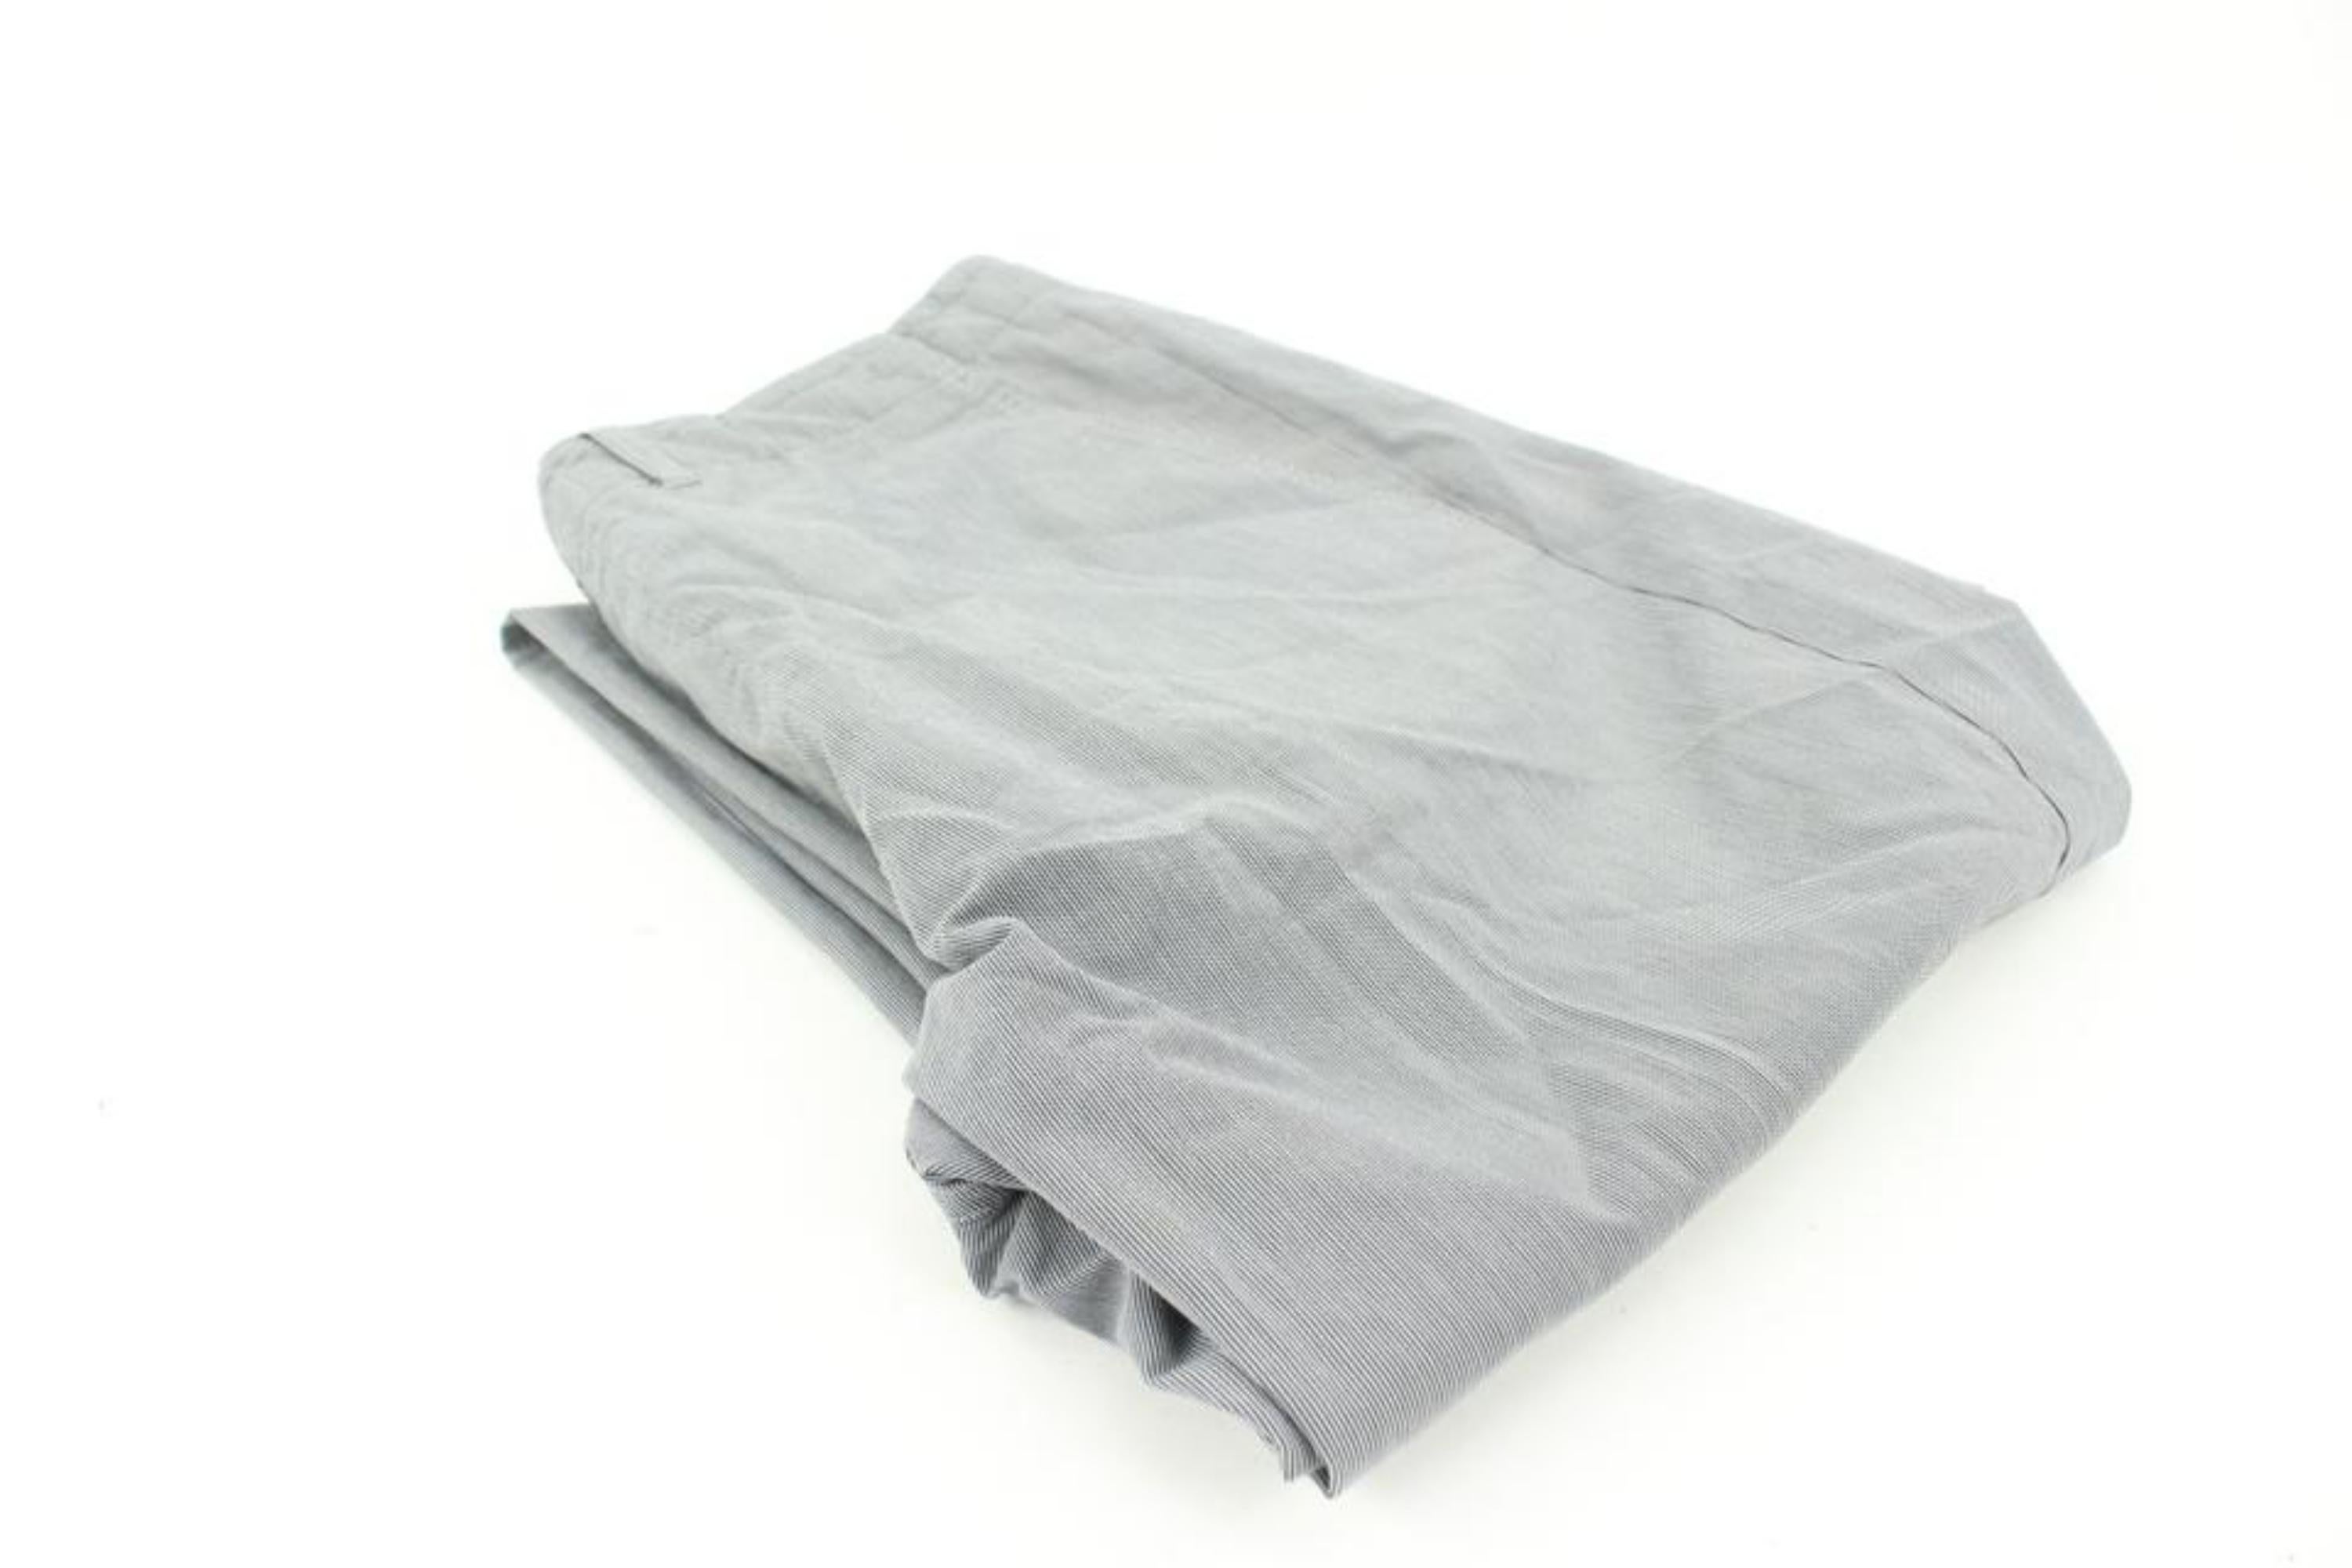 Louis Vuitton Men's 30 Grey Pants 125lv25
Made In: Italy
Measurements: Length:  16